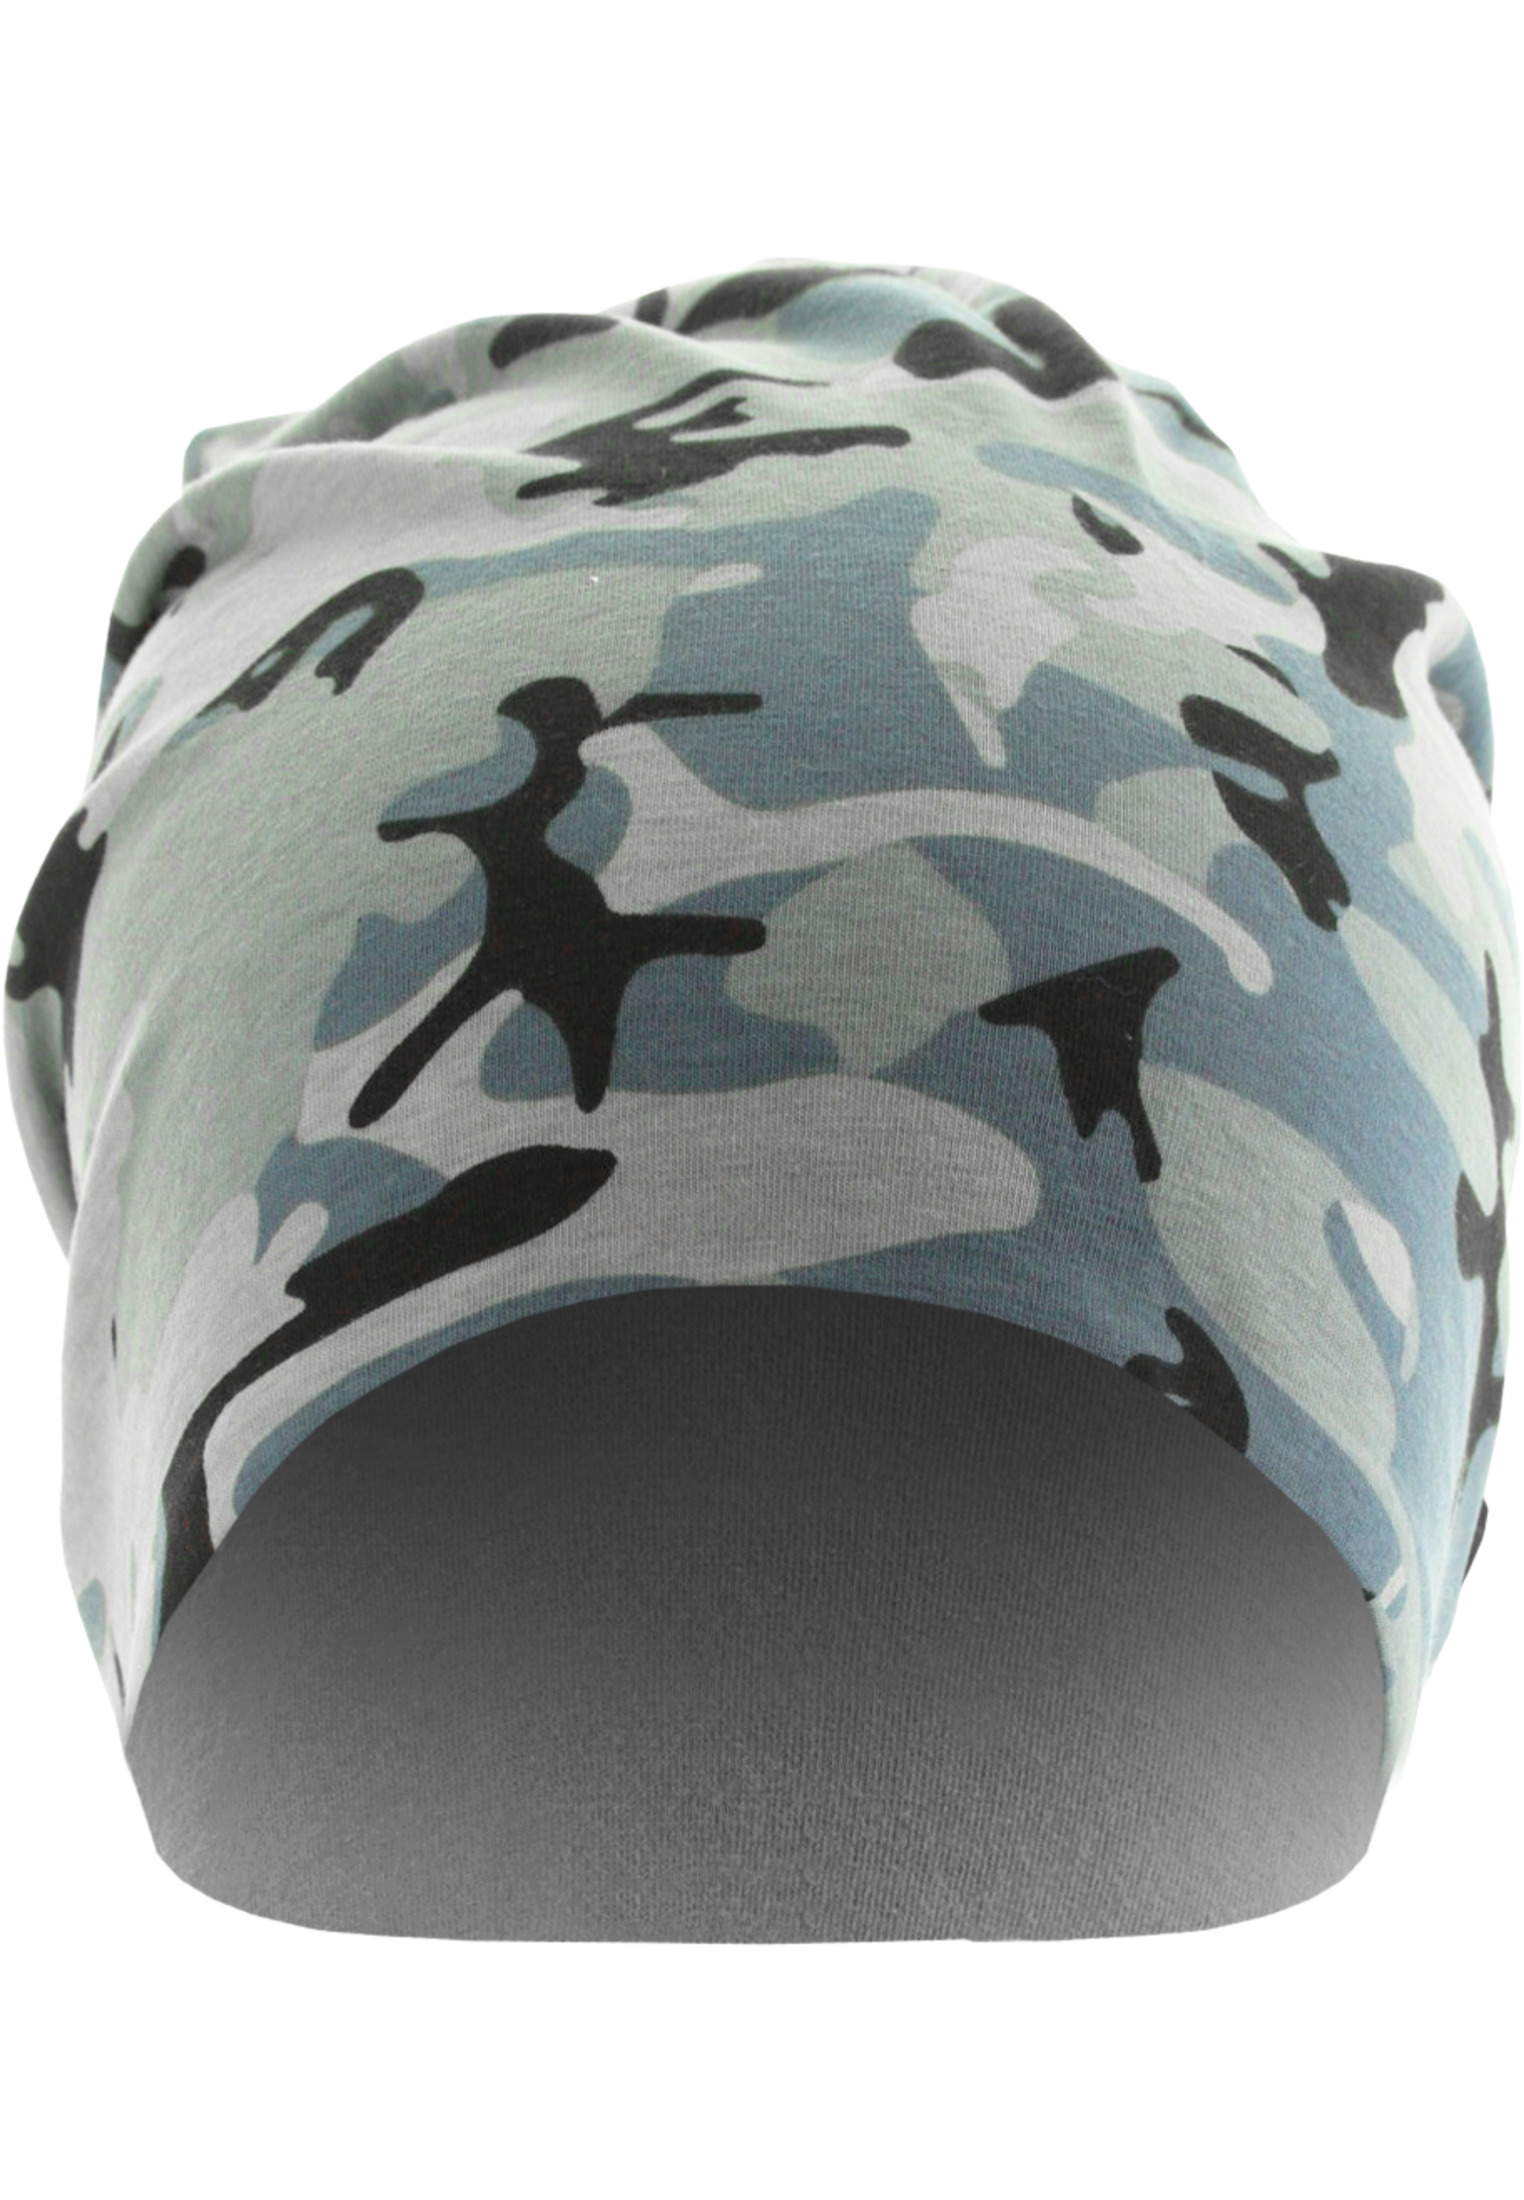 Caps & Beanies Printed Jersey Beanie in Farbe grey camo/charcoal